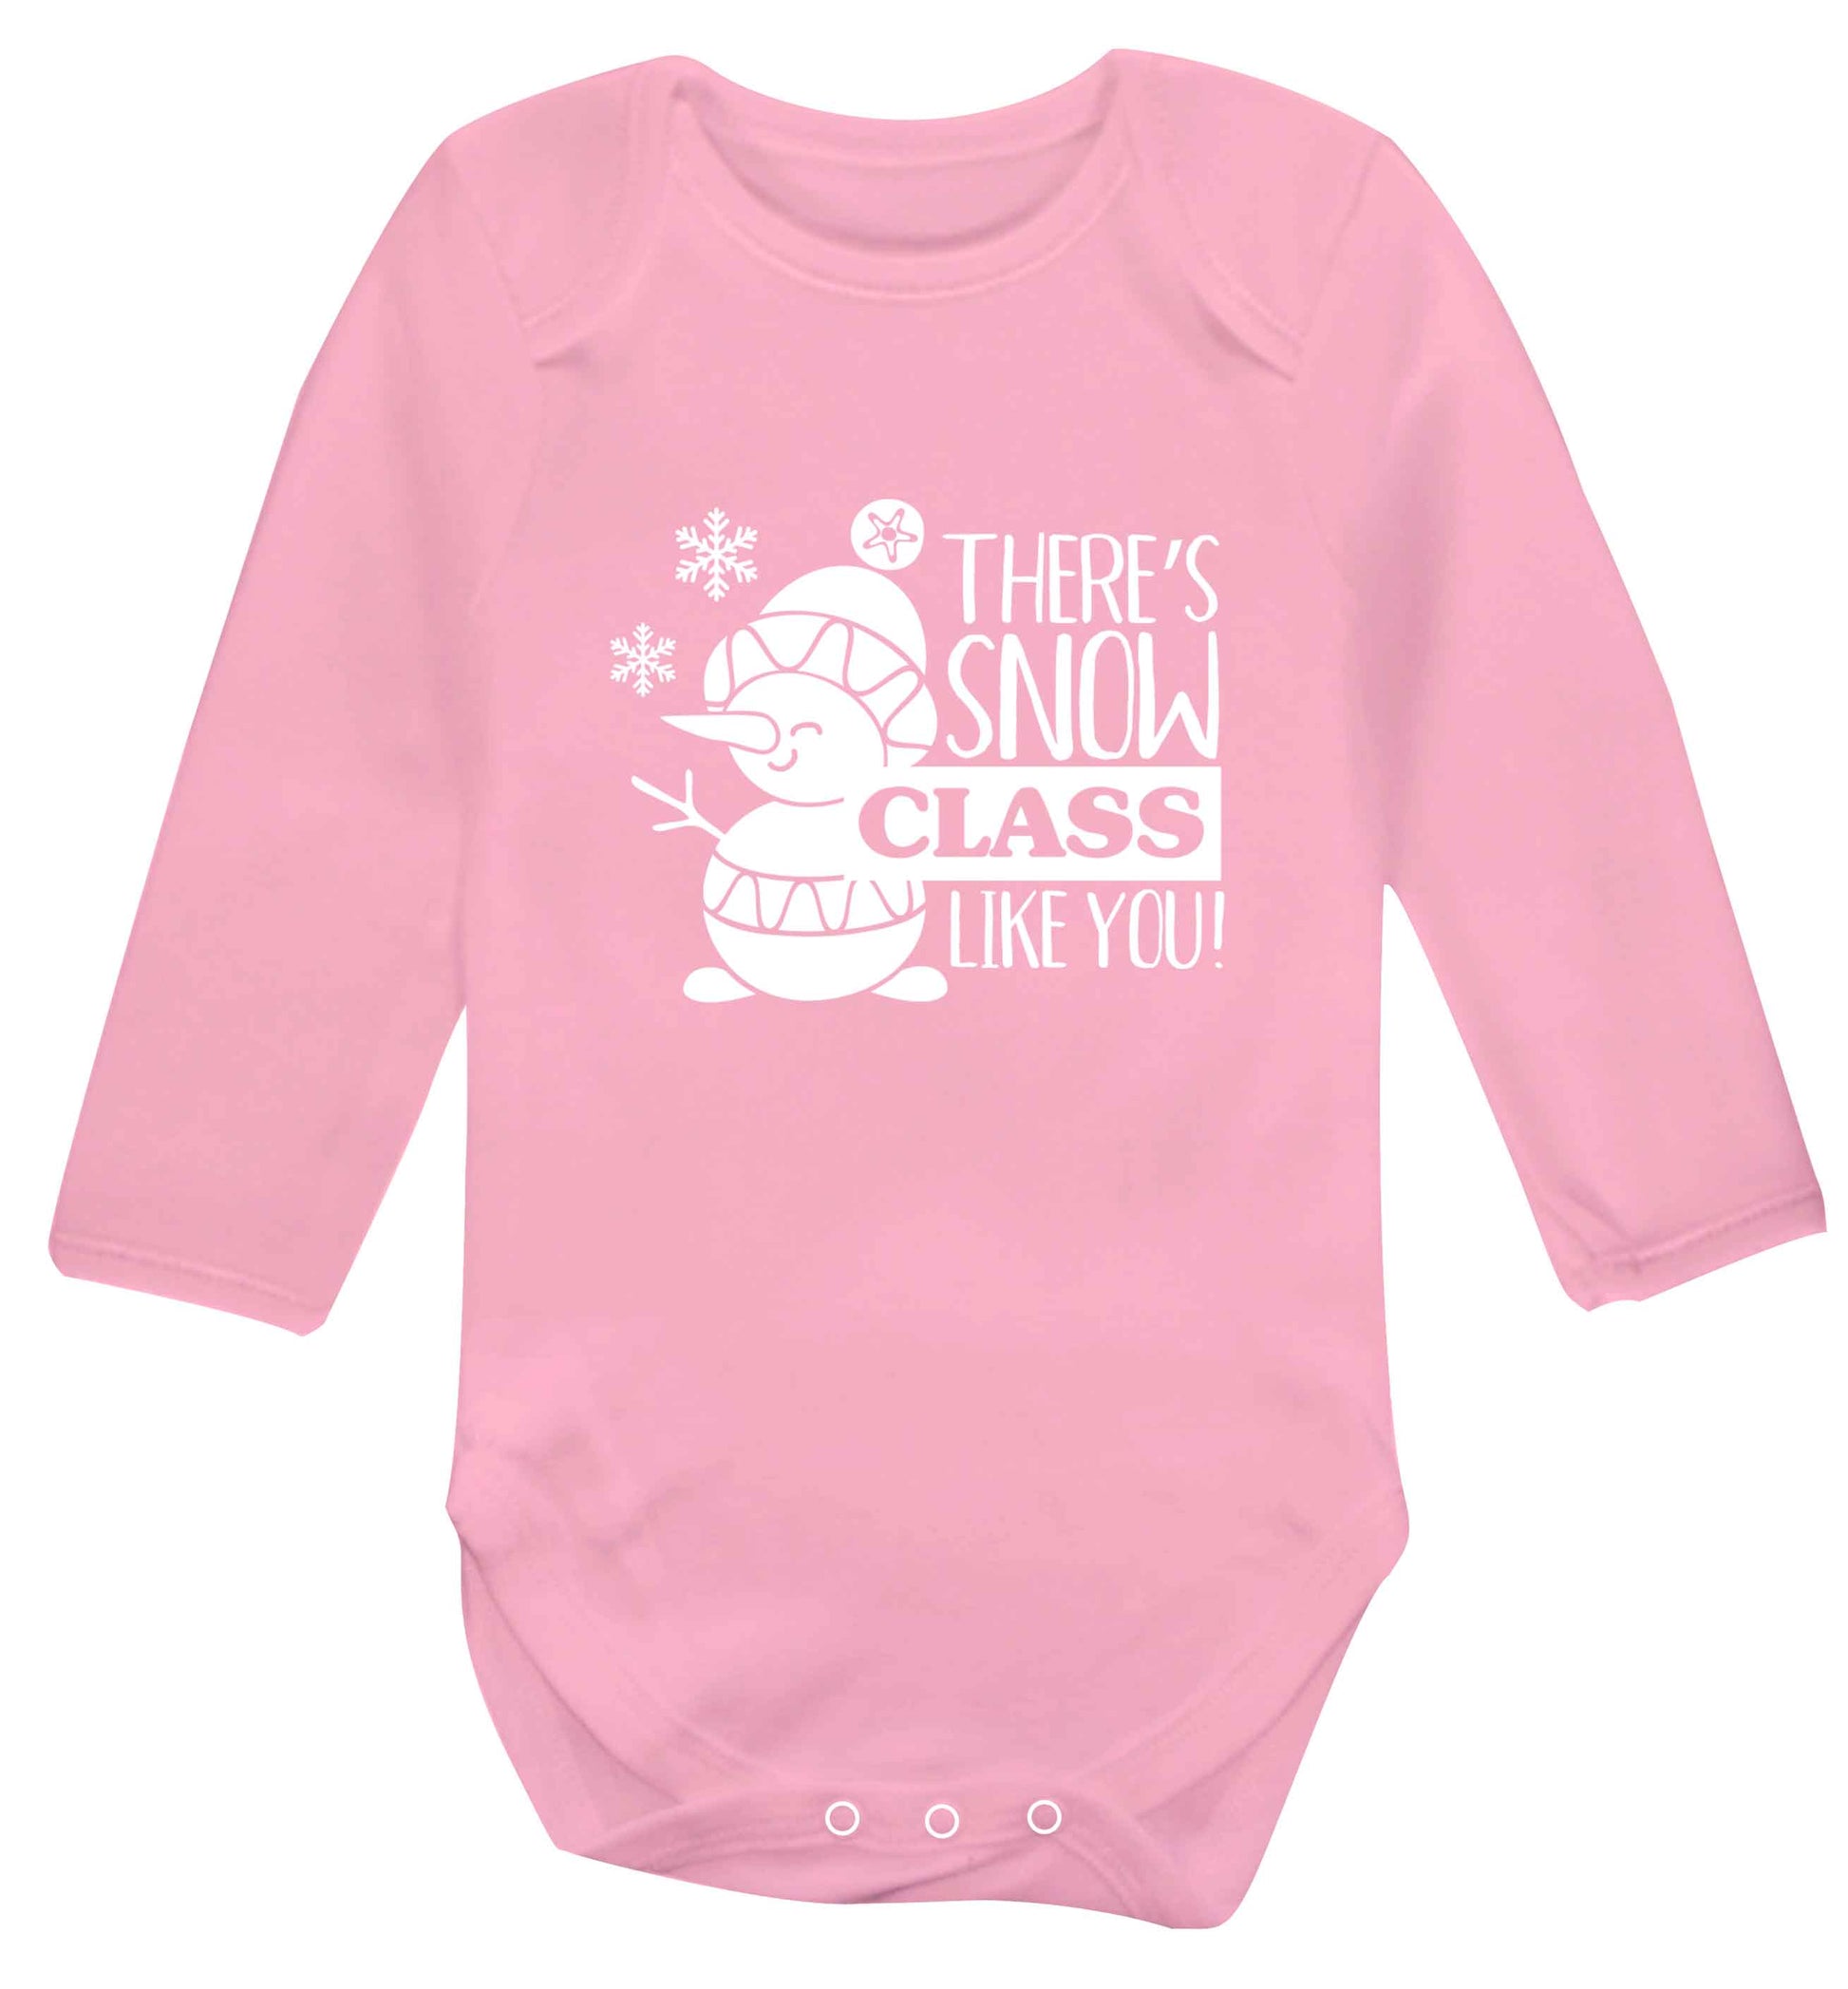 There's snow class like you baby vest long sleeved pale pink 6-12 months